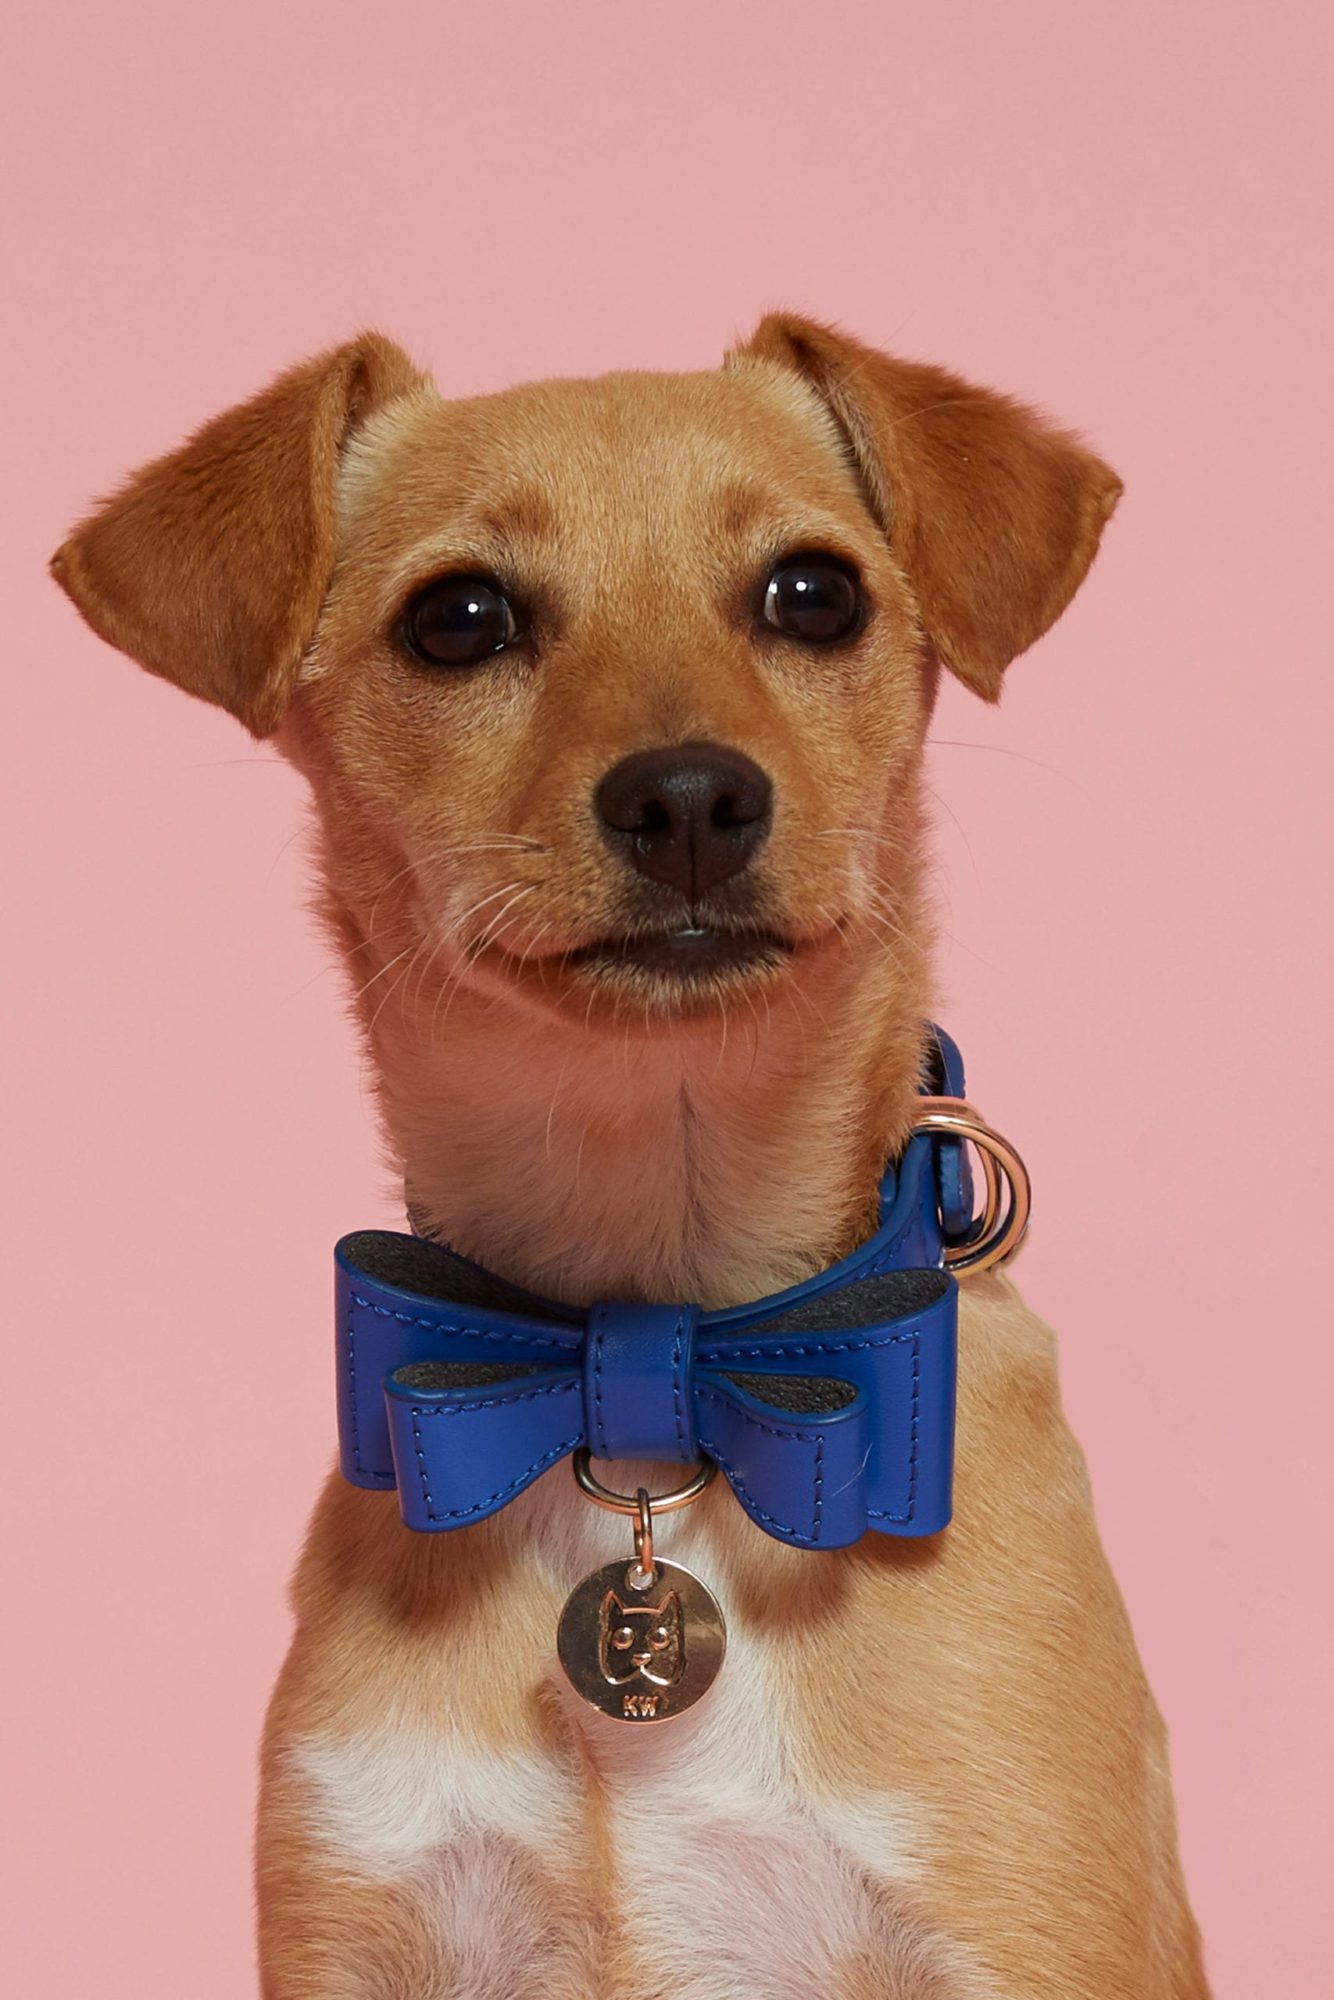 Karen Walker Launches Cute Capsule Collection to Support SPCA